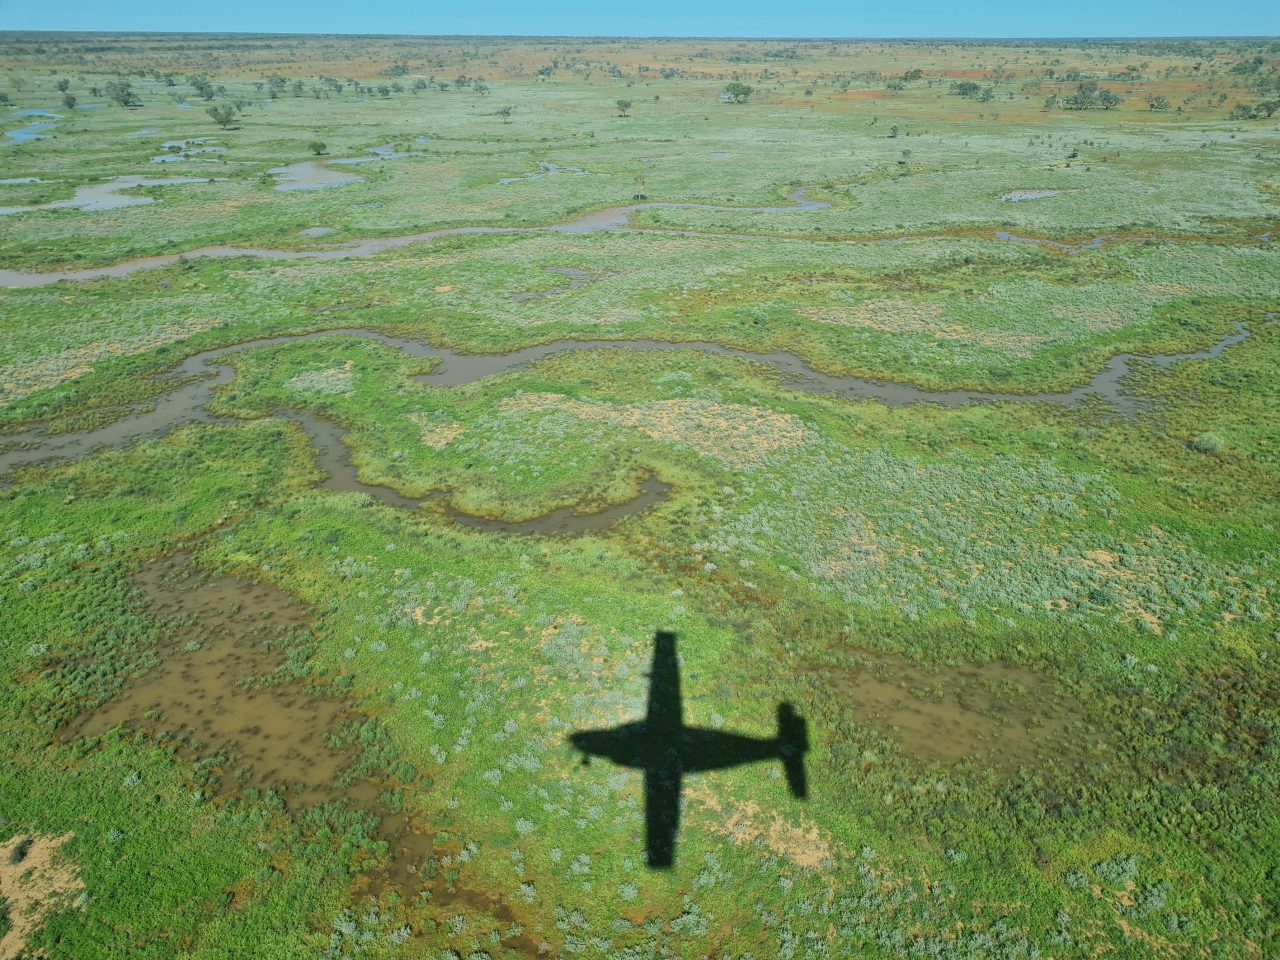 Aerial photo of green vegetated landscape and very full creek channels with brown water meandering across the floodplain.  Shadow of the aircraft is in foreground of photo. Small strip of sky above the horizon is clear and blue.